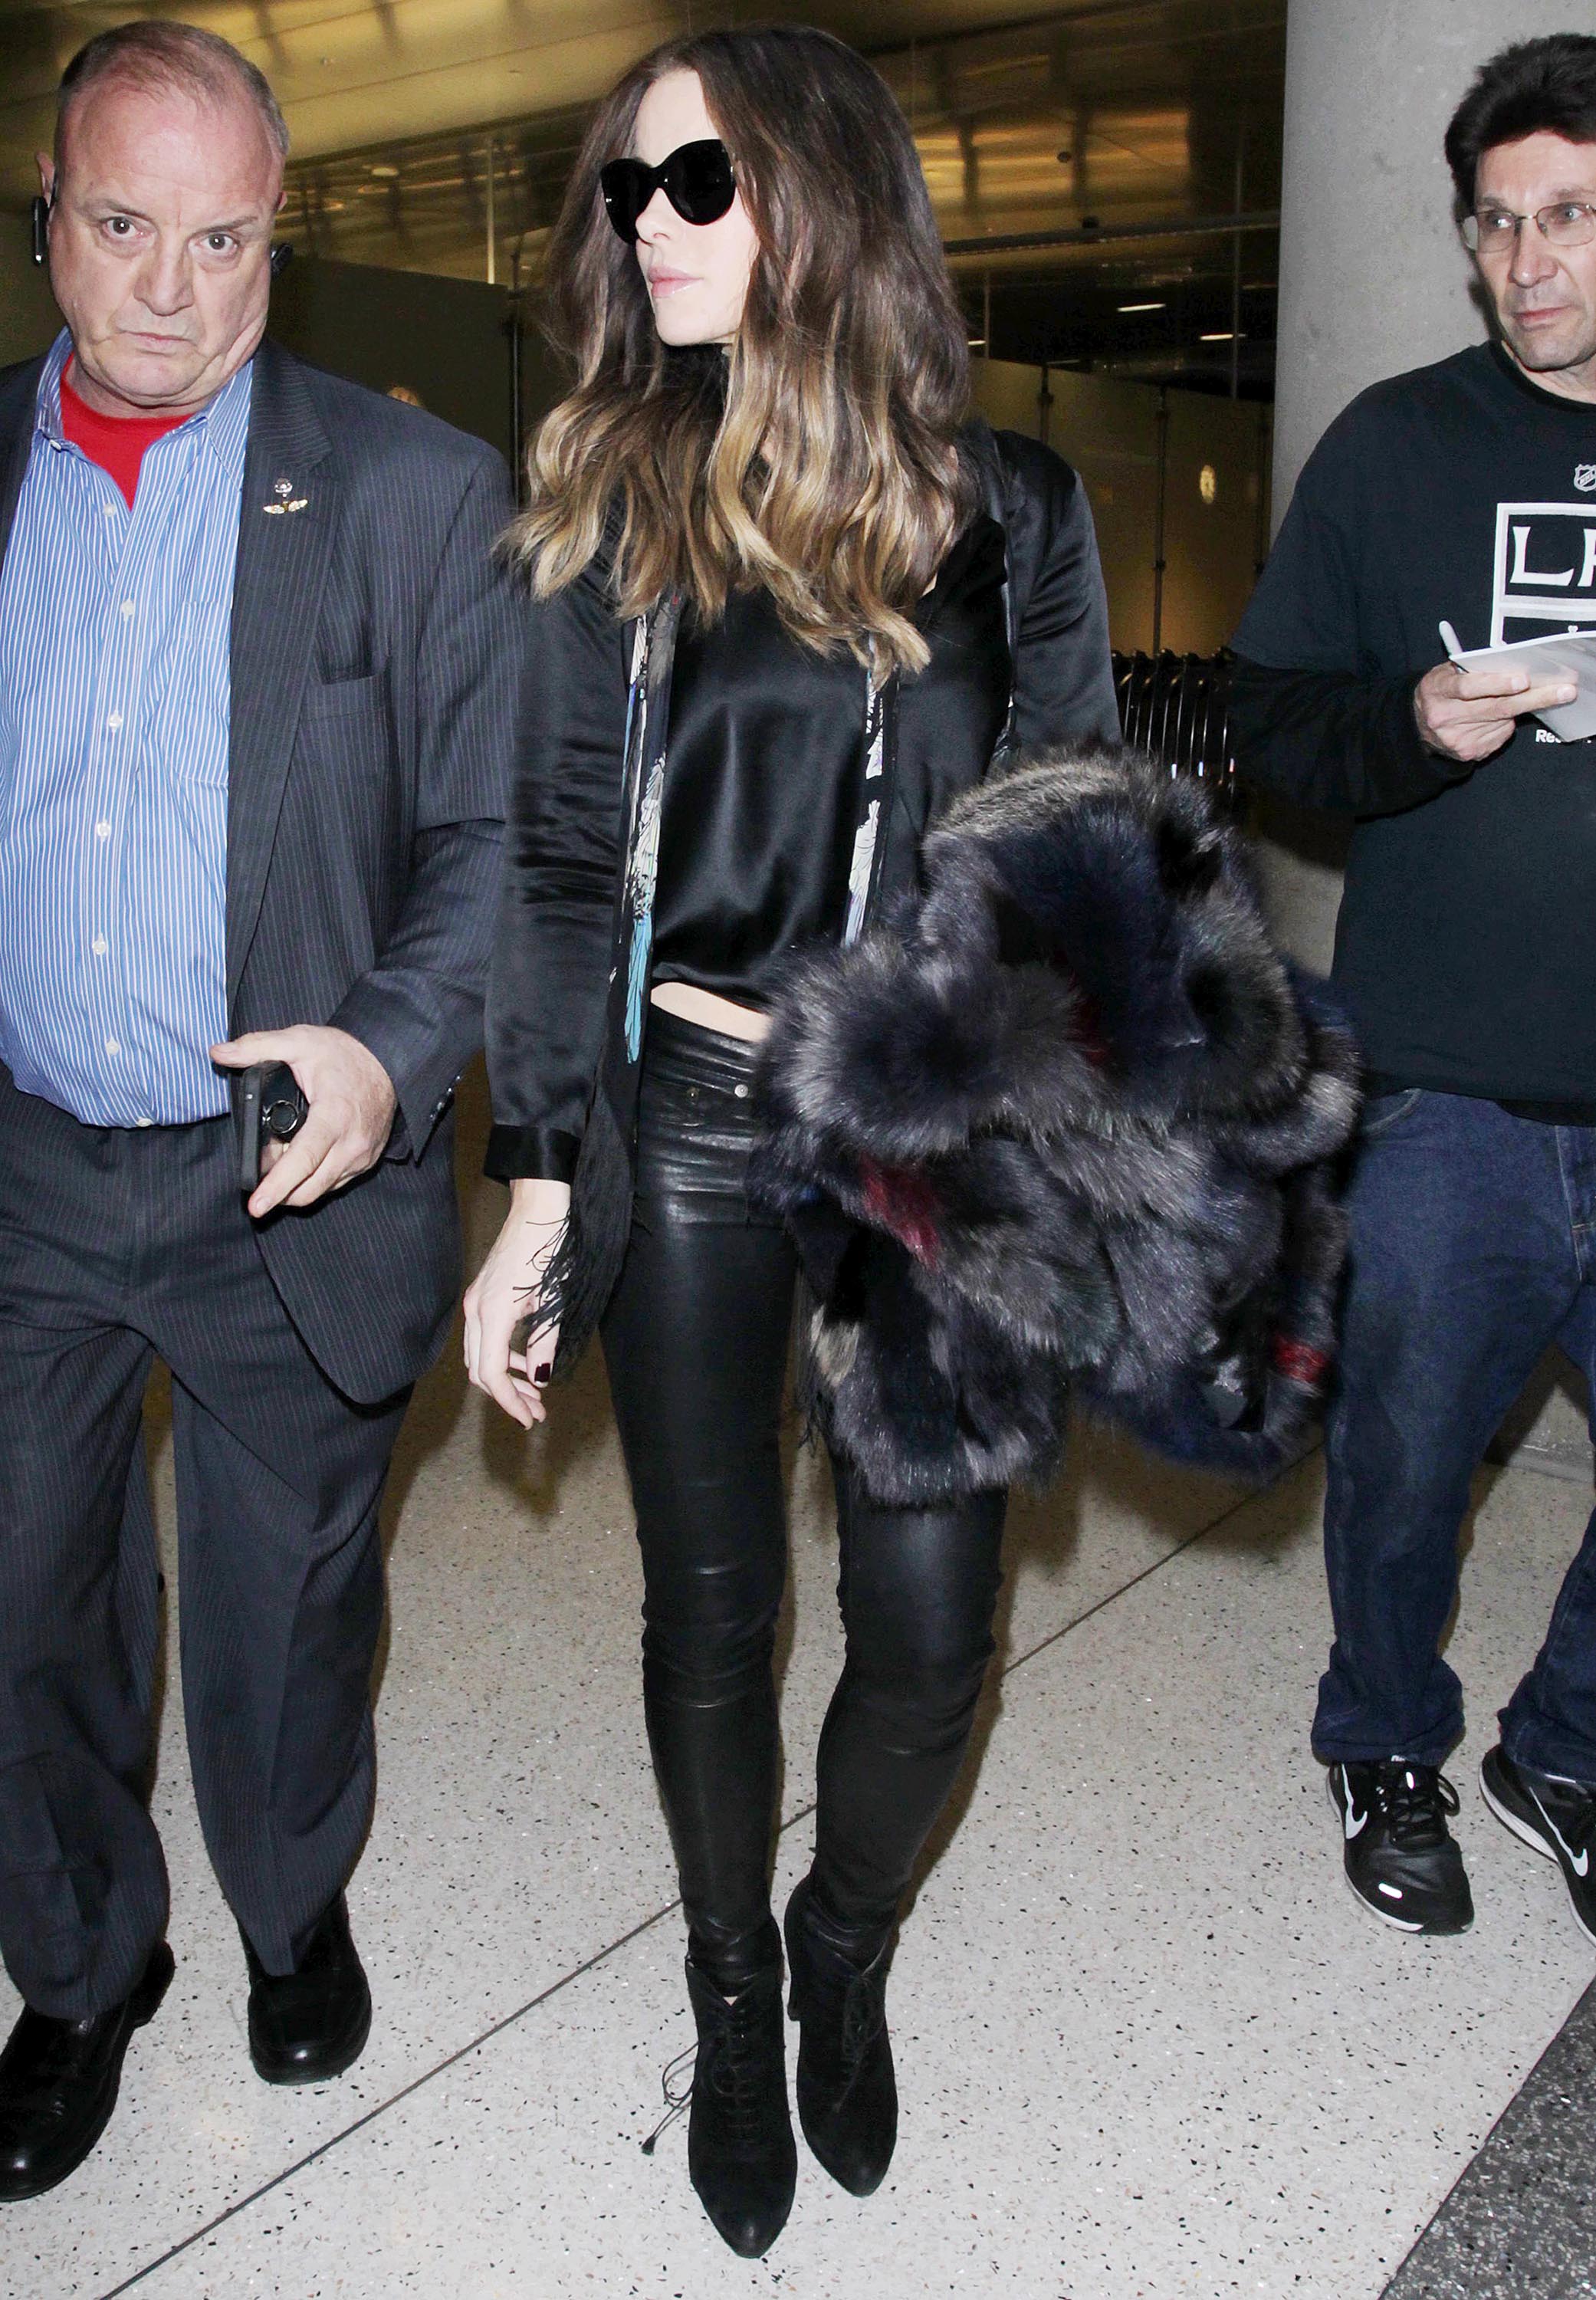 Kate Beckinsale is seen at LAX